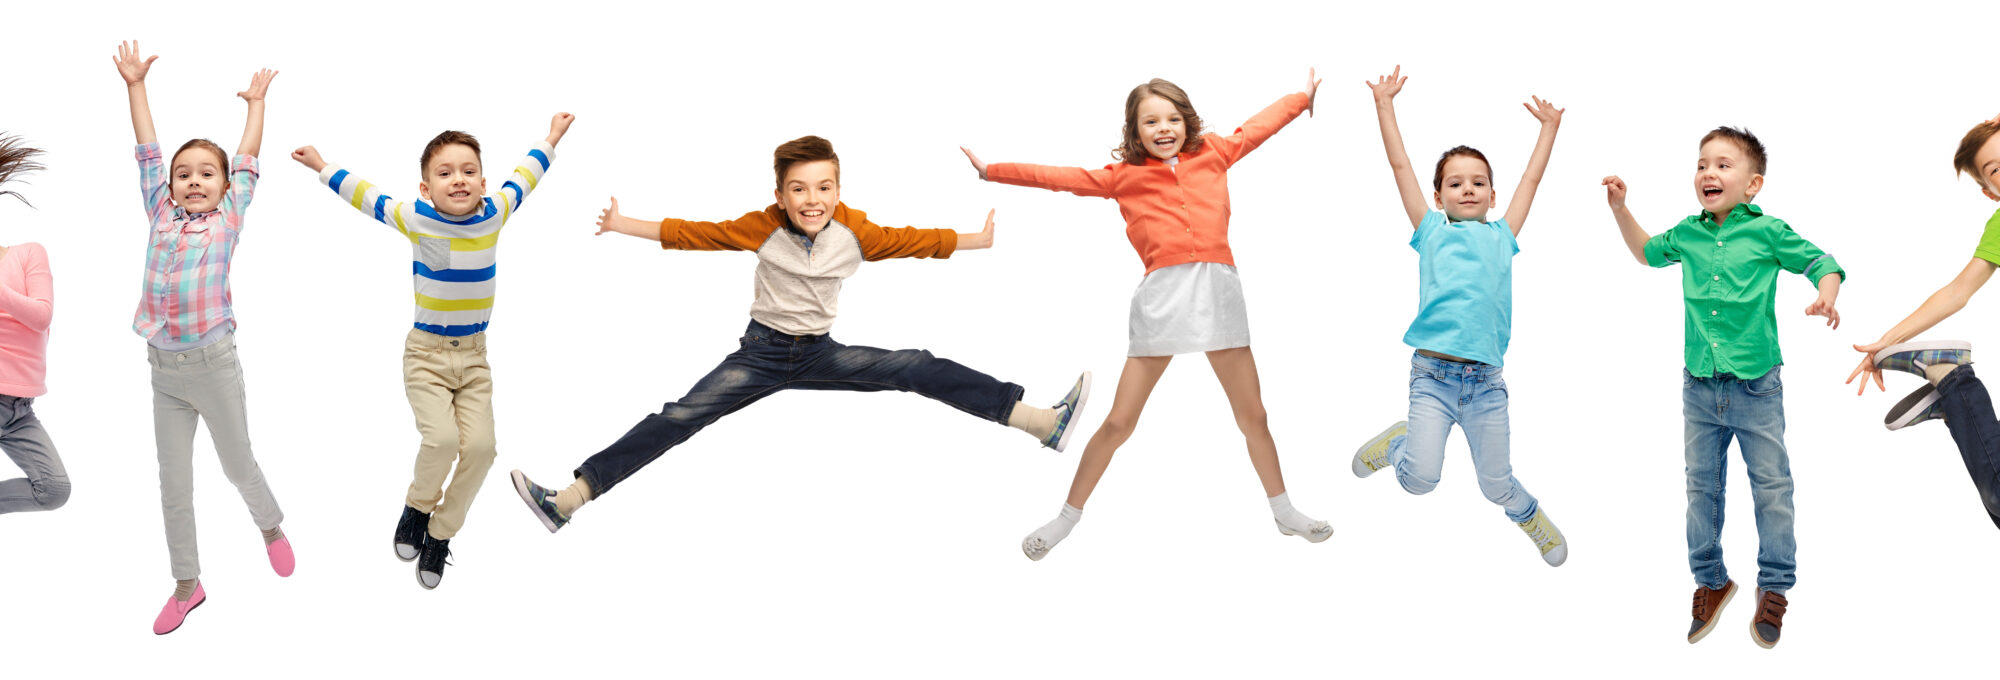 happy kids jumping in air over white background